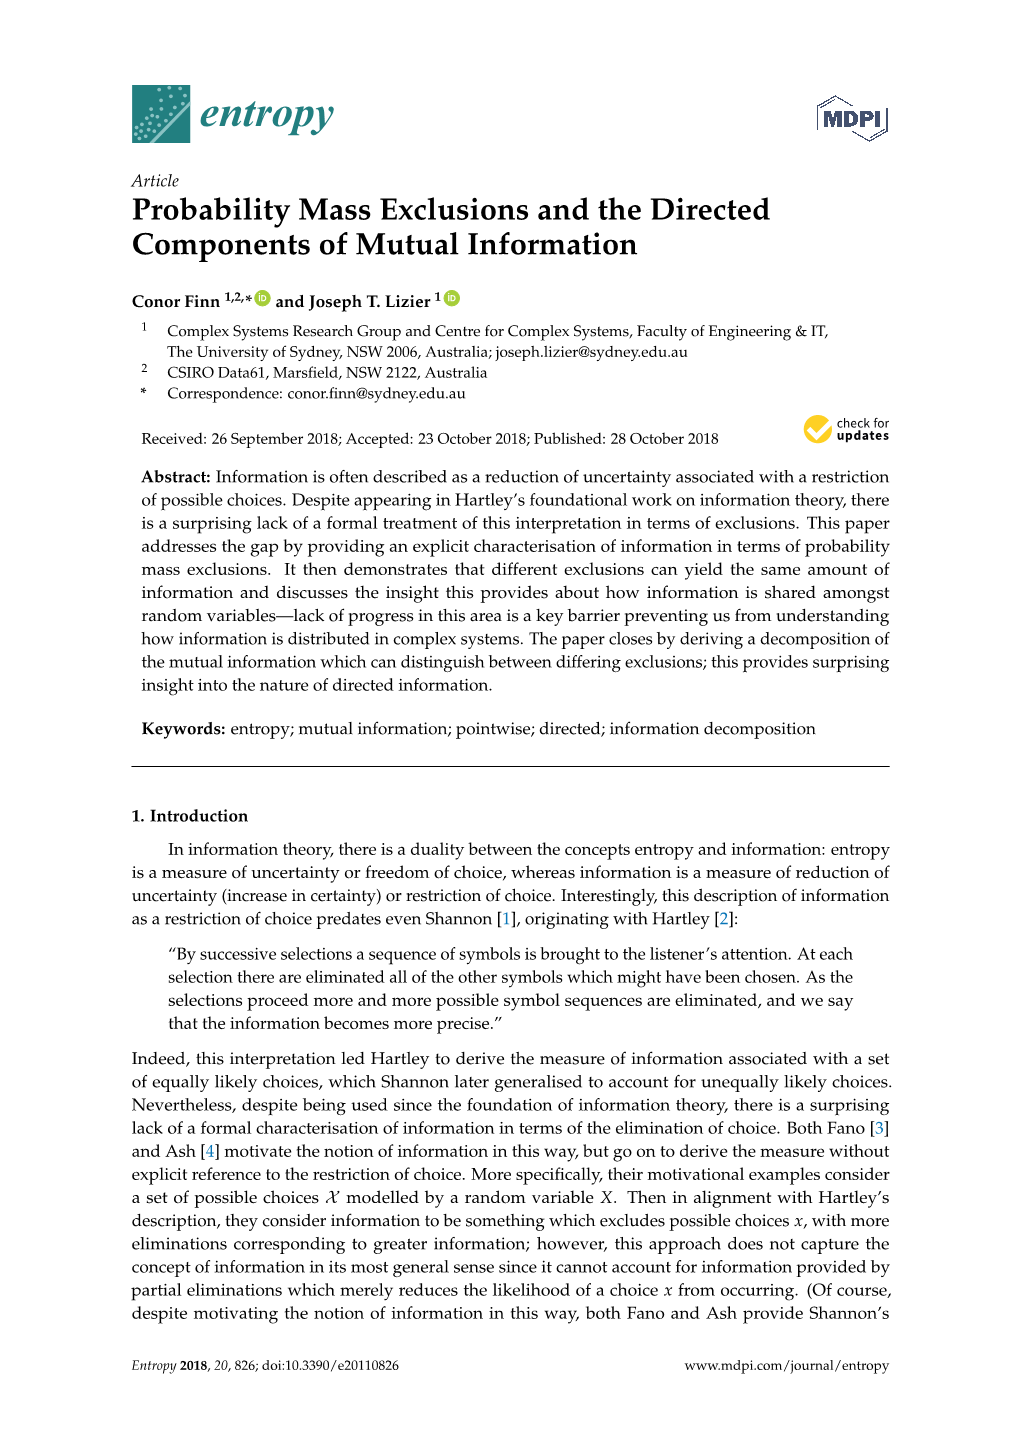 Probability Mass Exclusions and the Directed Components of Mutual Information